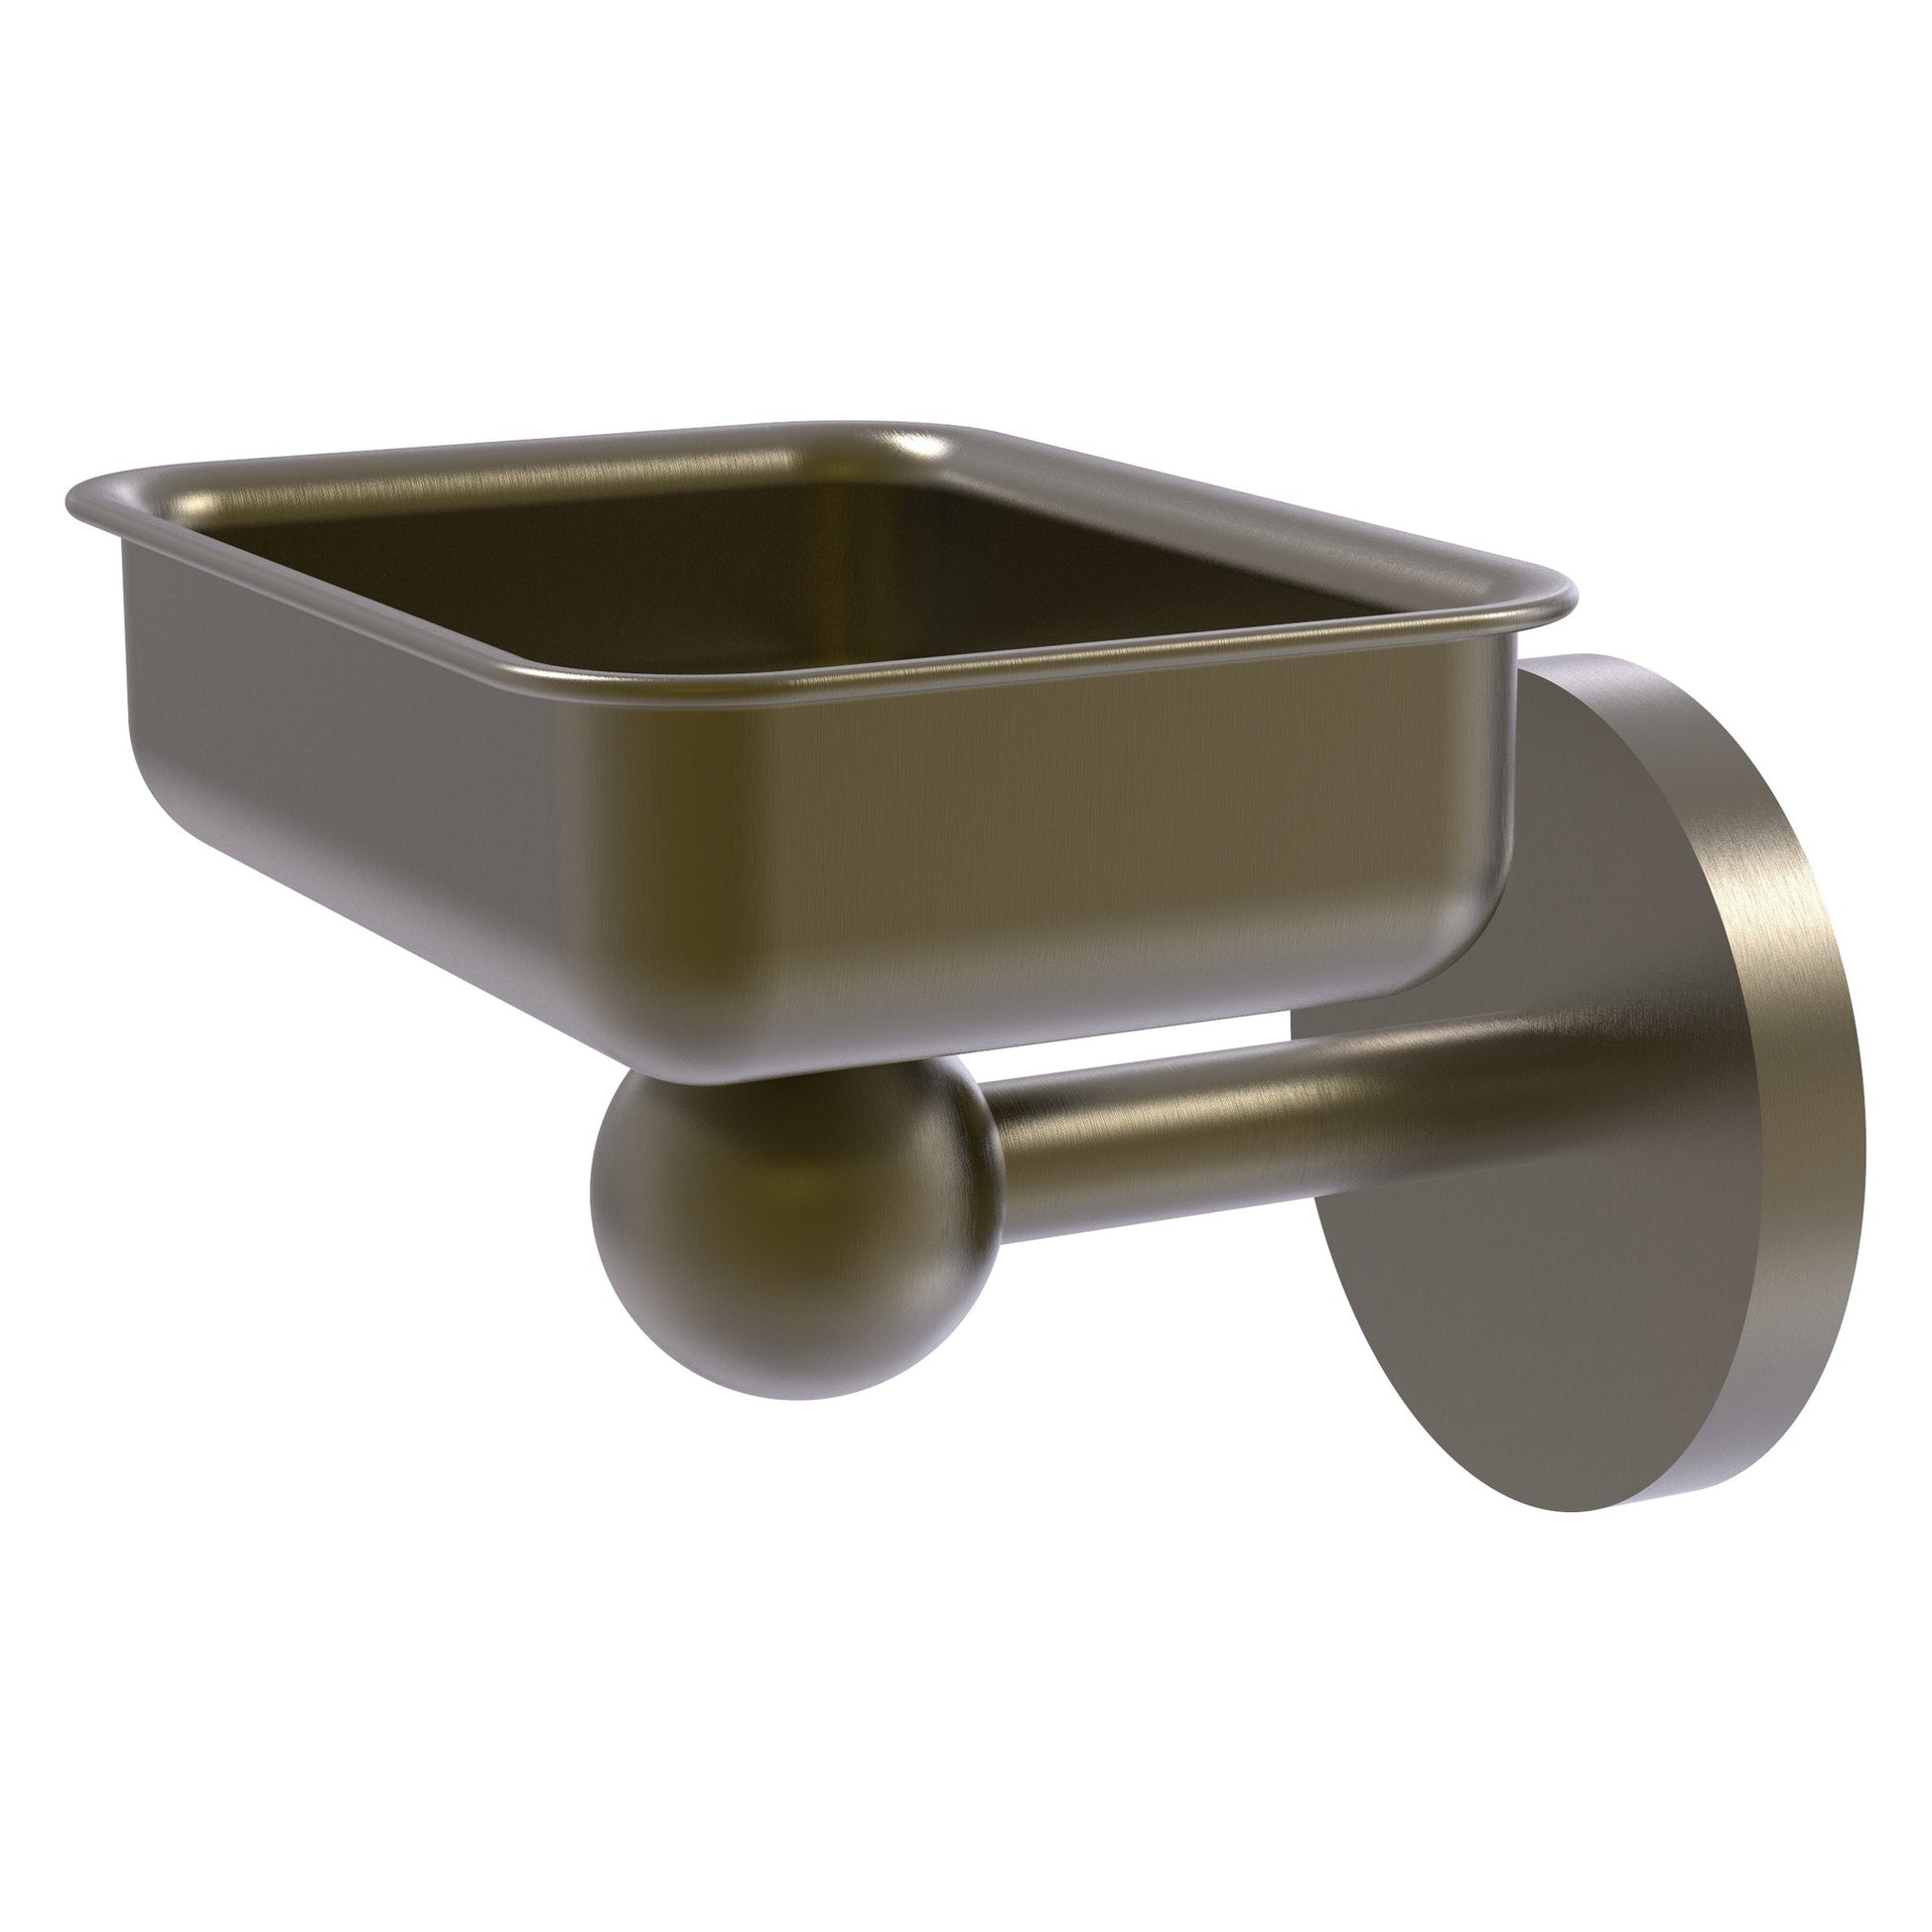 Allied Brass Skyline 4.5" x 3.5" Antique Brass Solid Brass Wall-Mounted Soap Dish